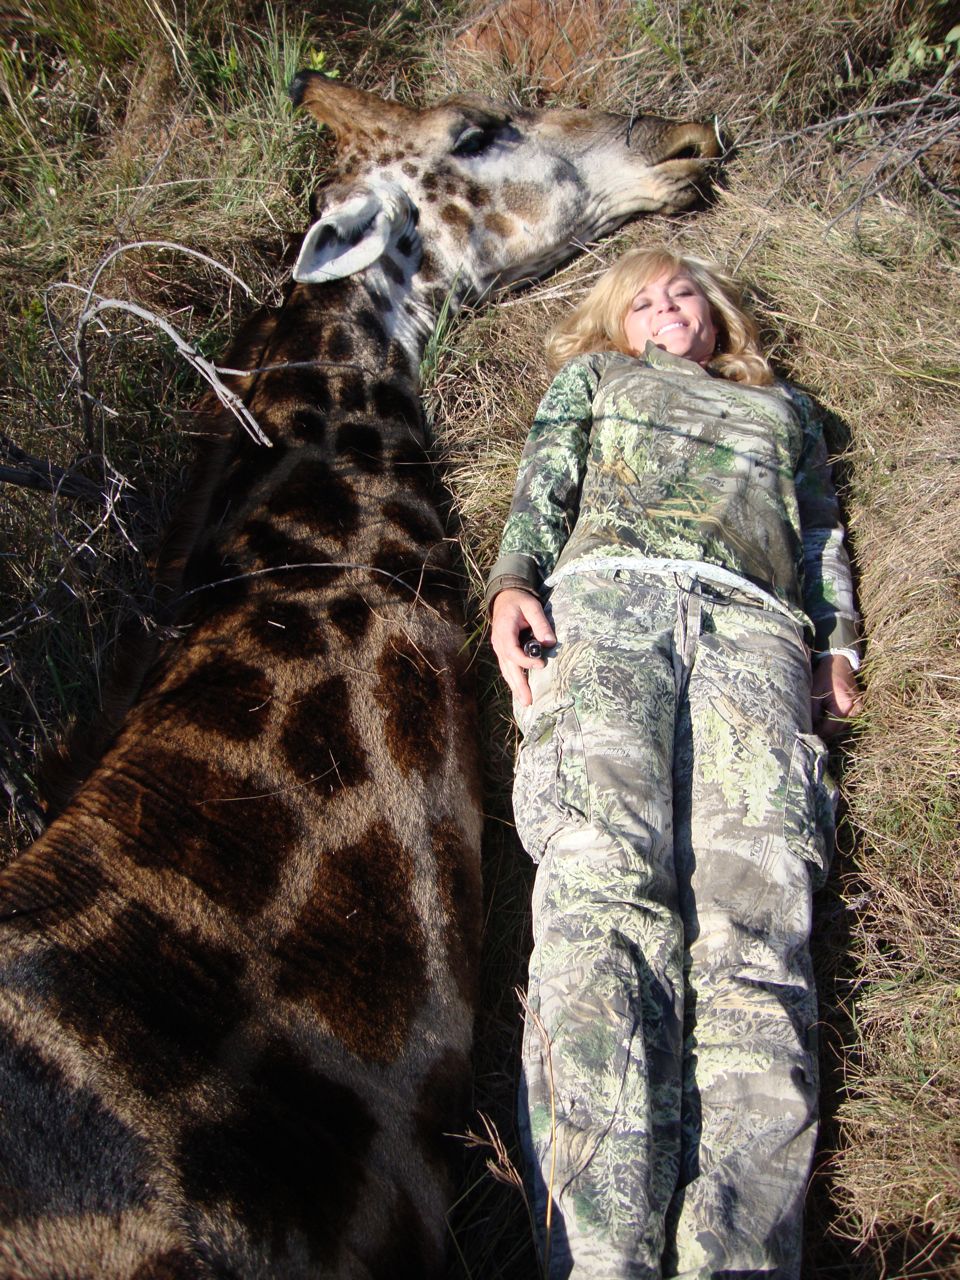 Rebecca Francis posing next to her kills…using a high powered rifle to shoot an animal is not a ‘sport’